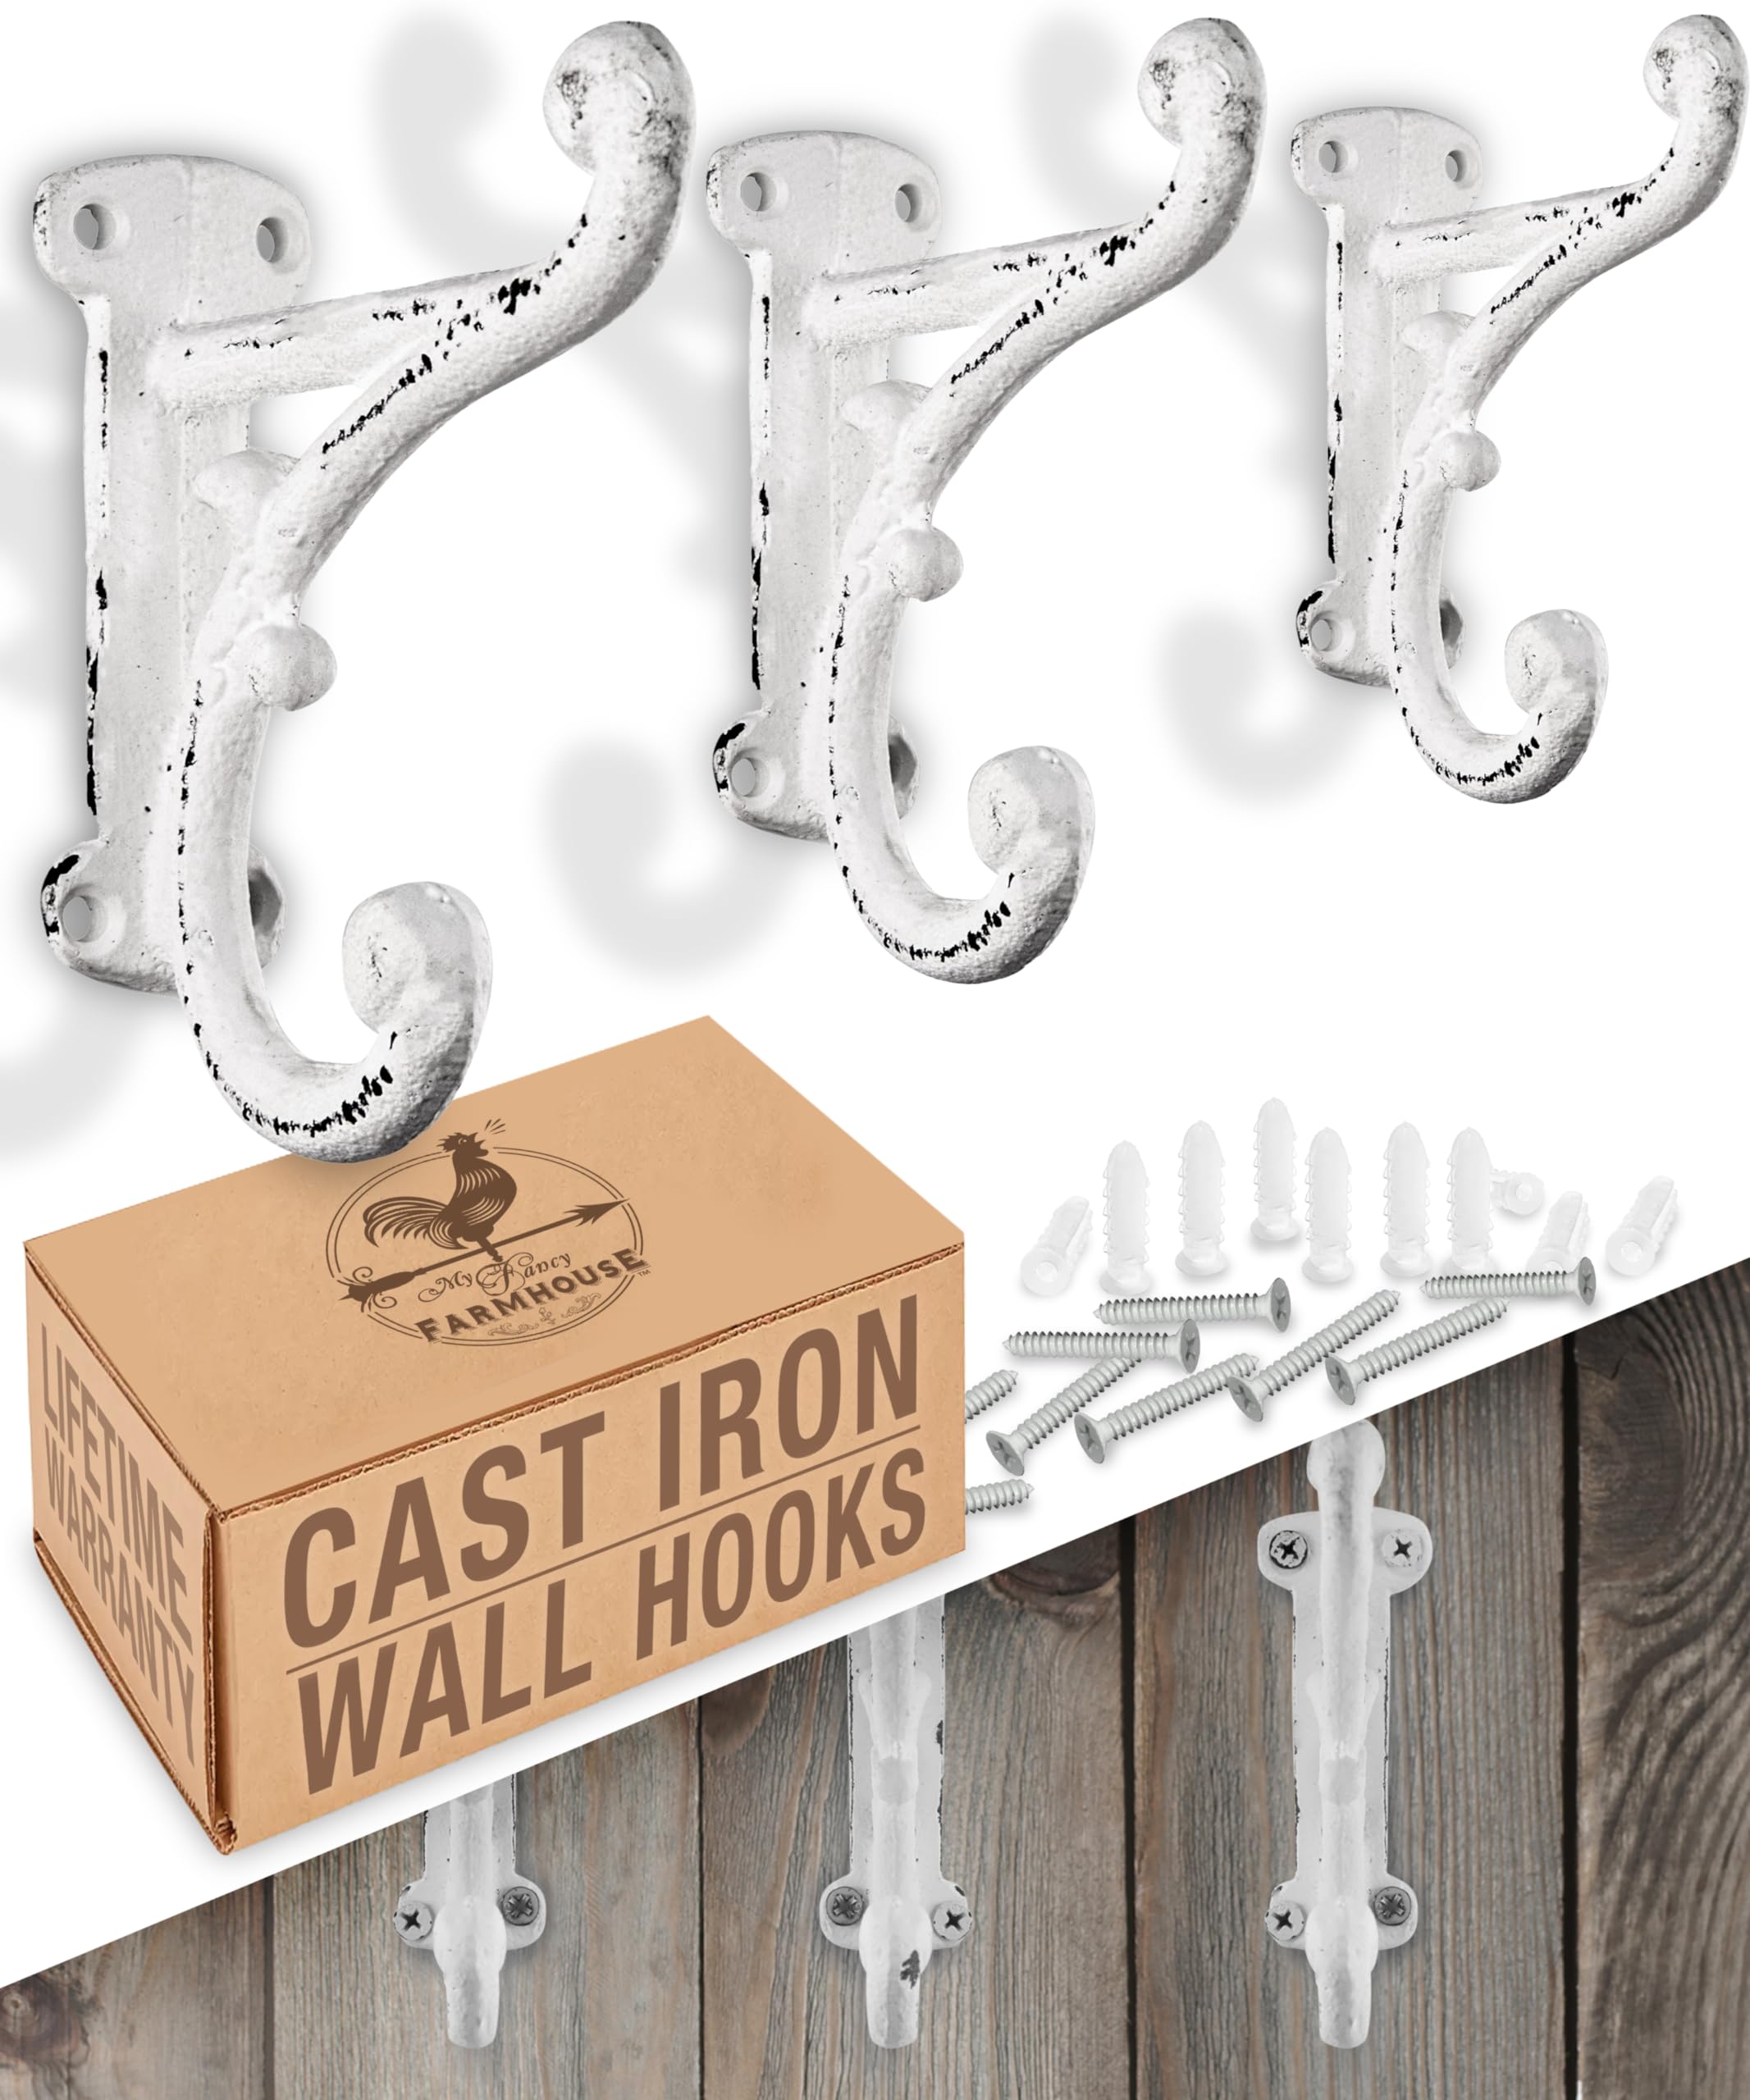 Rustic Cast Iron Coat Hooks (3 Pack) Antique White and Dark Brown, Wall  Mounted, Farmhouse Decorative, Heavy Duty Wall Hooks for Hanging Coats,  Hats